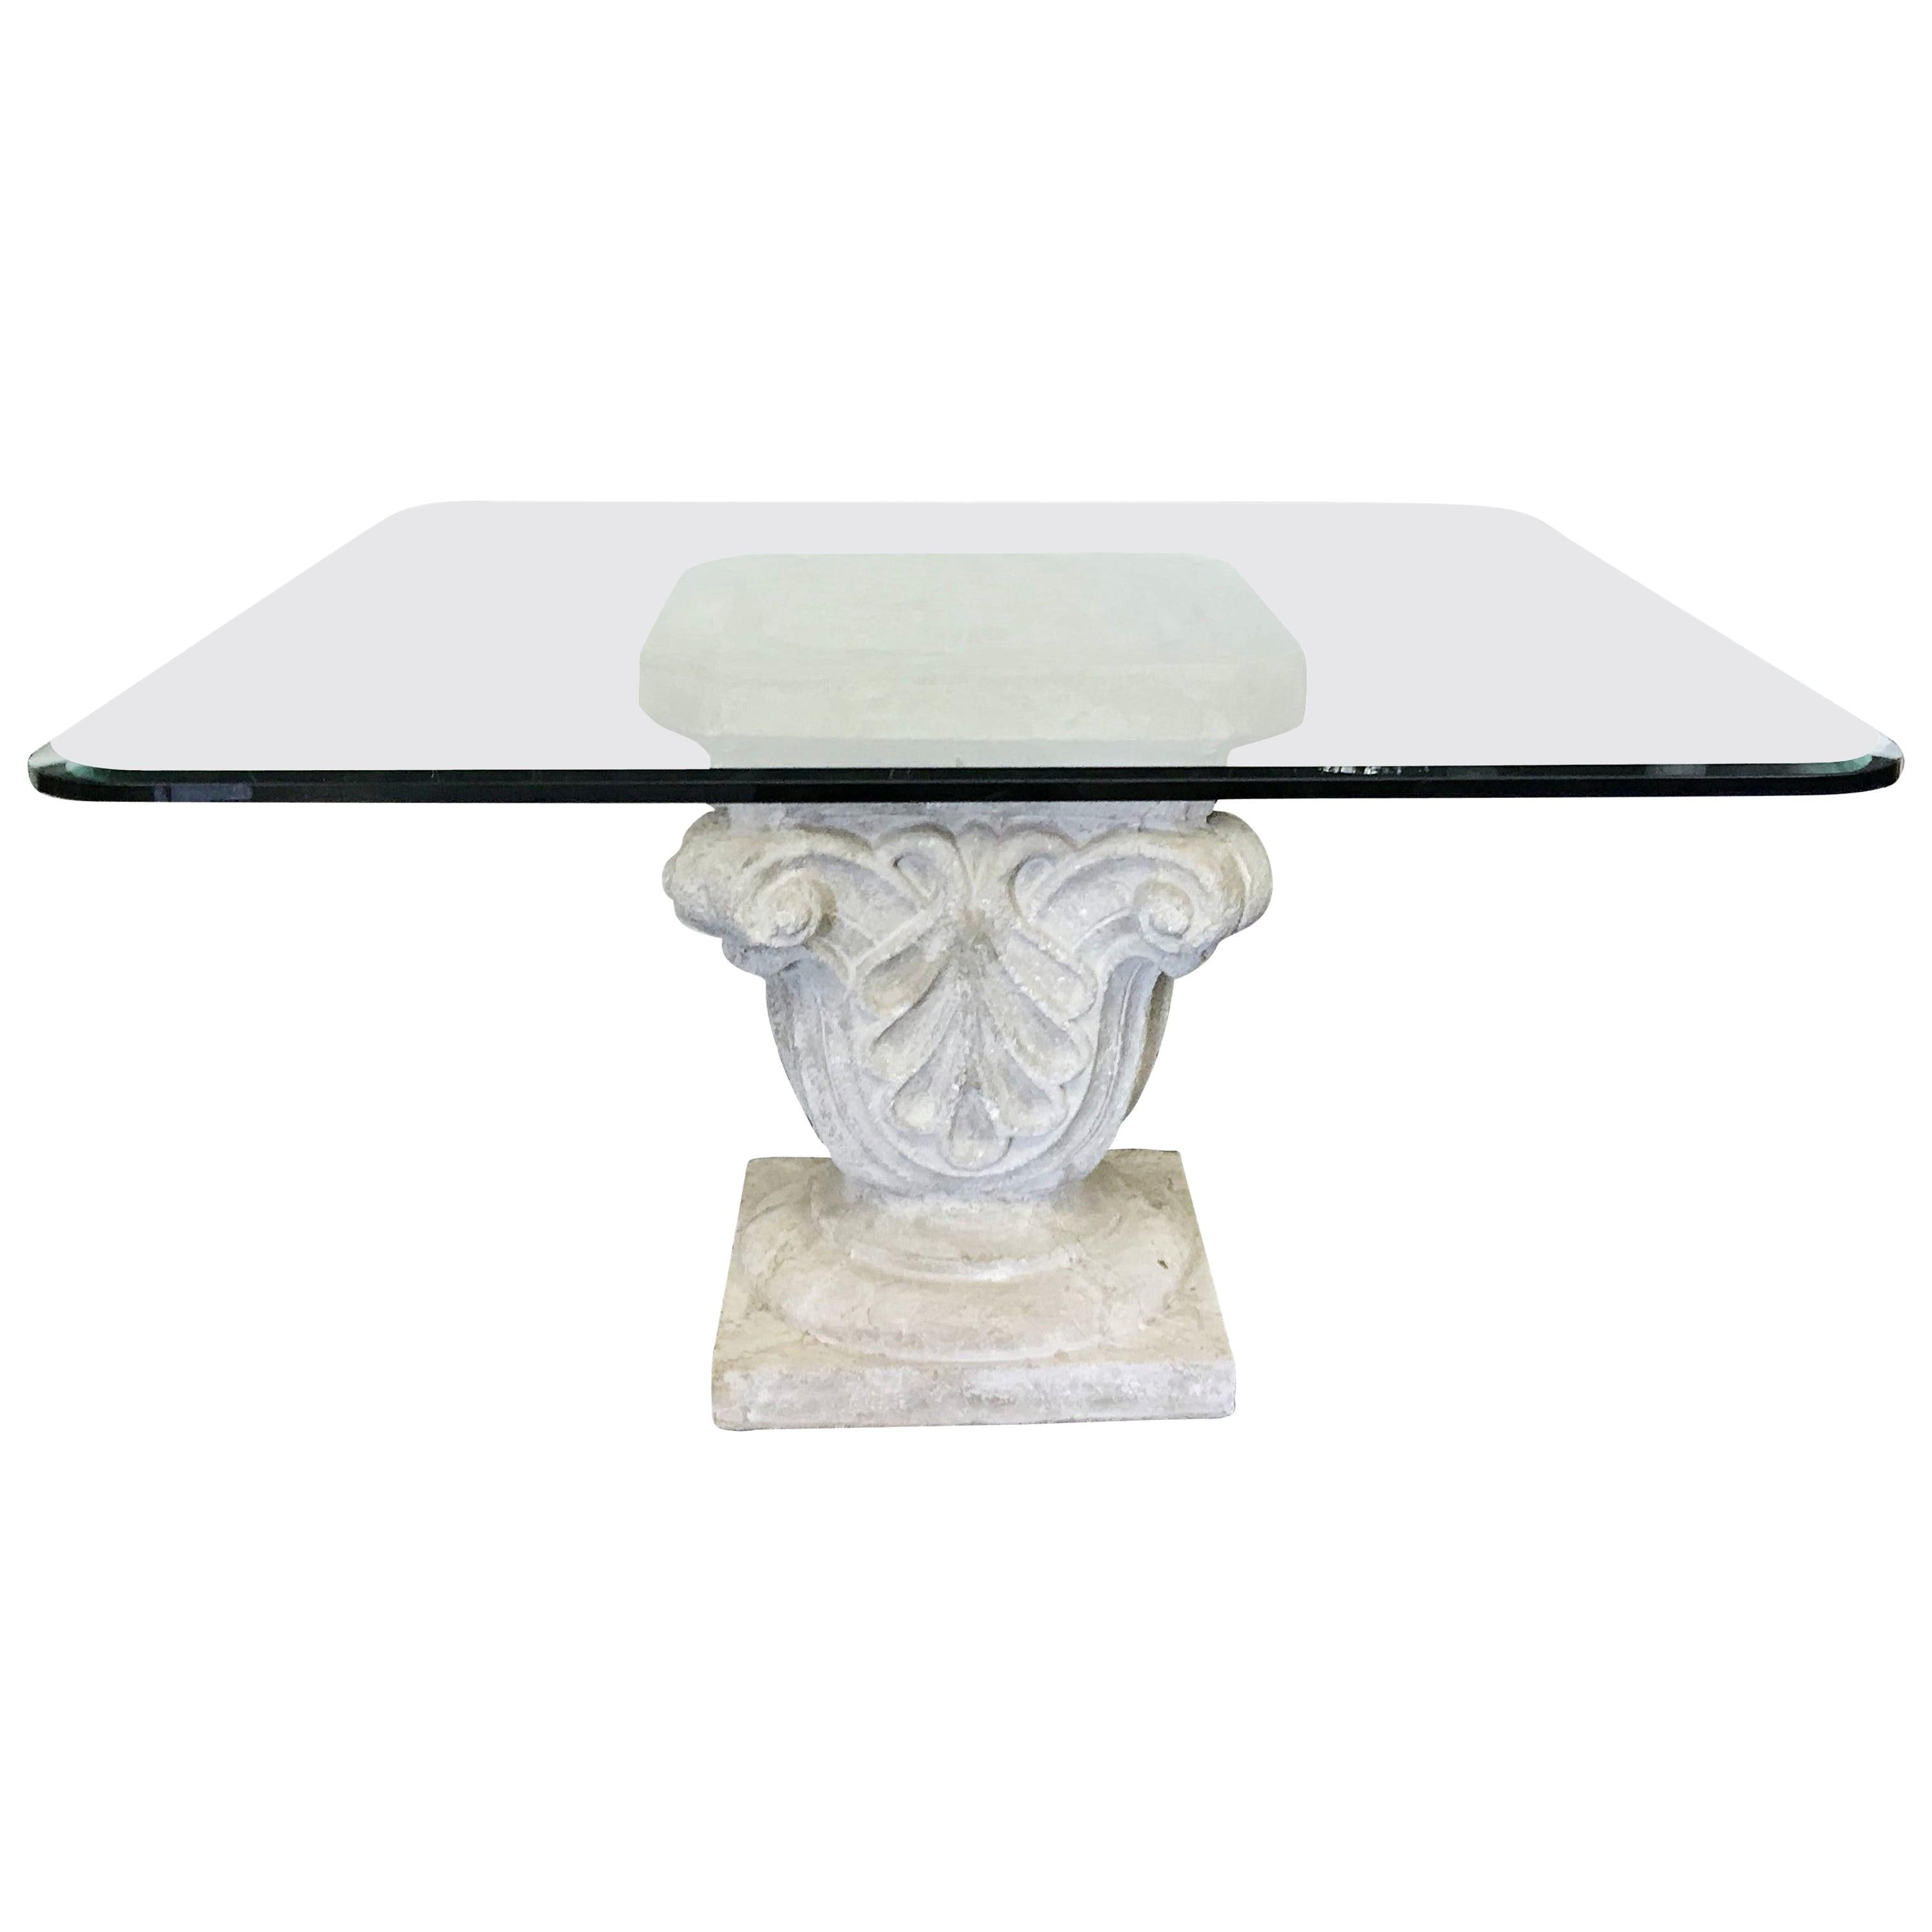 Faux Stone Table FINAL CLEARANCE SALE